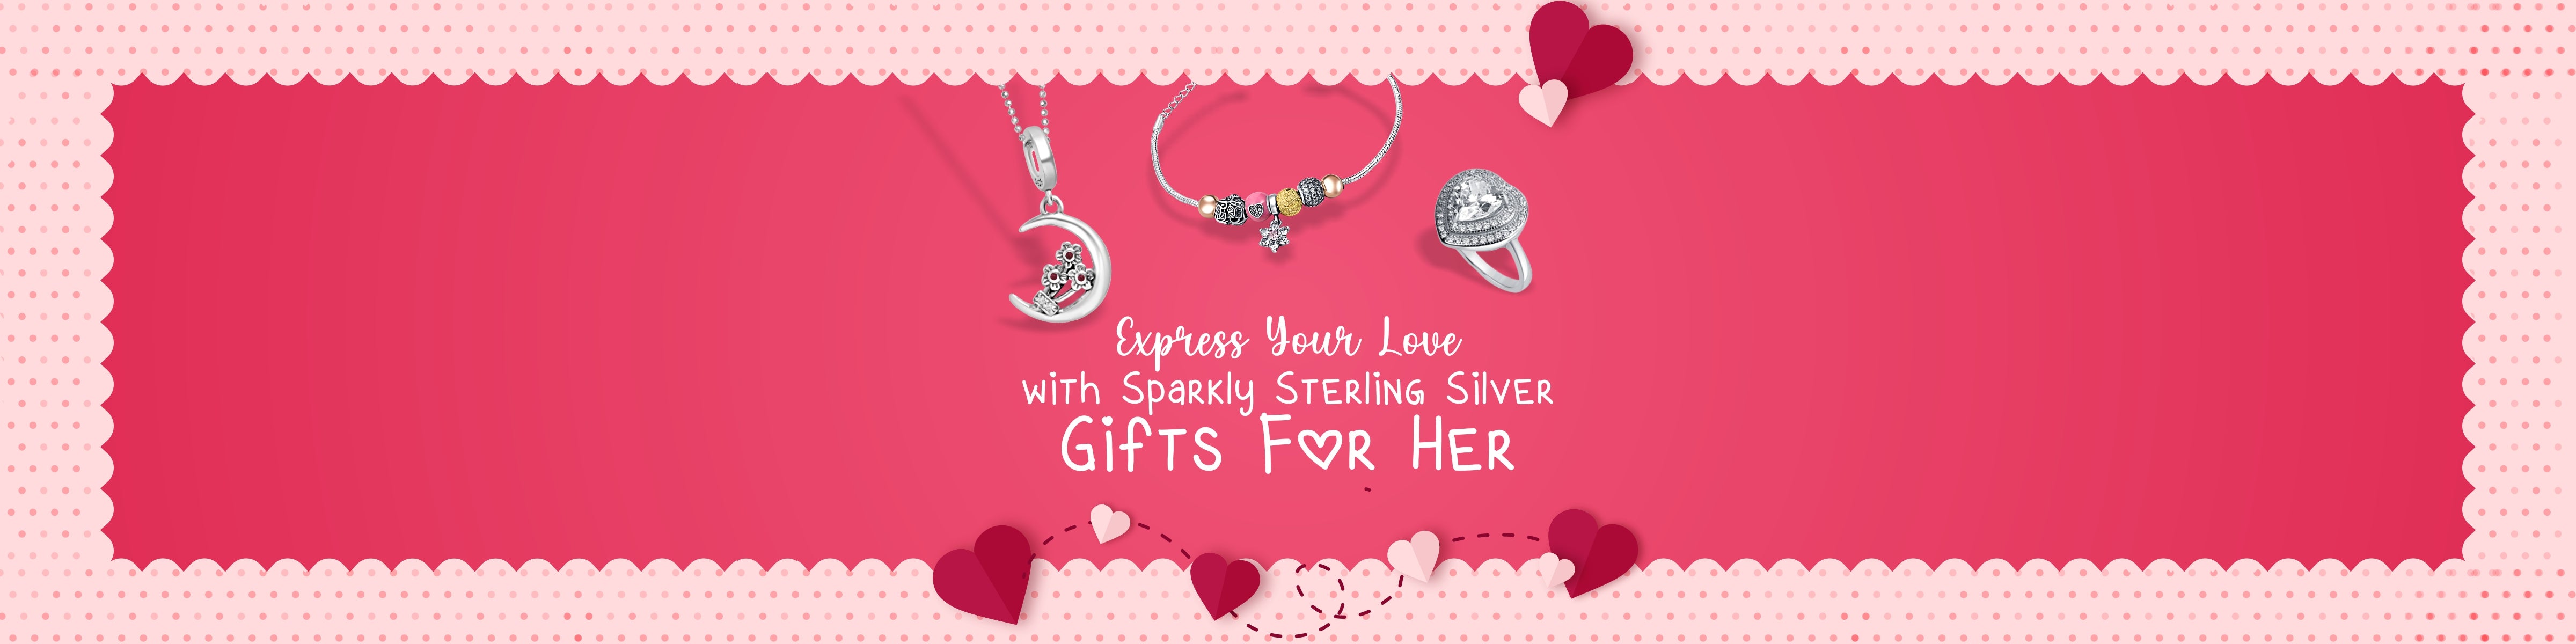 Express Your Love With Sparkly Sterling Silver Gifts for Her